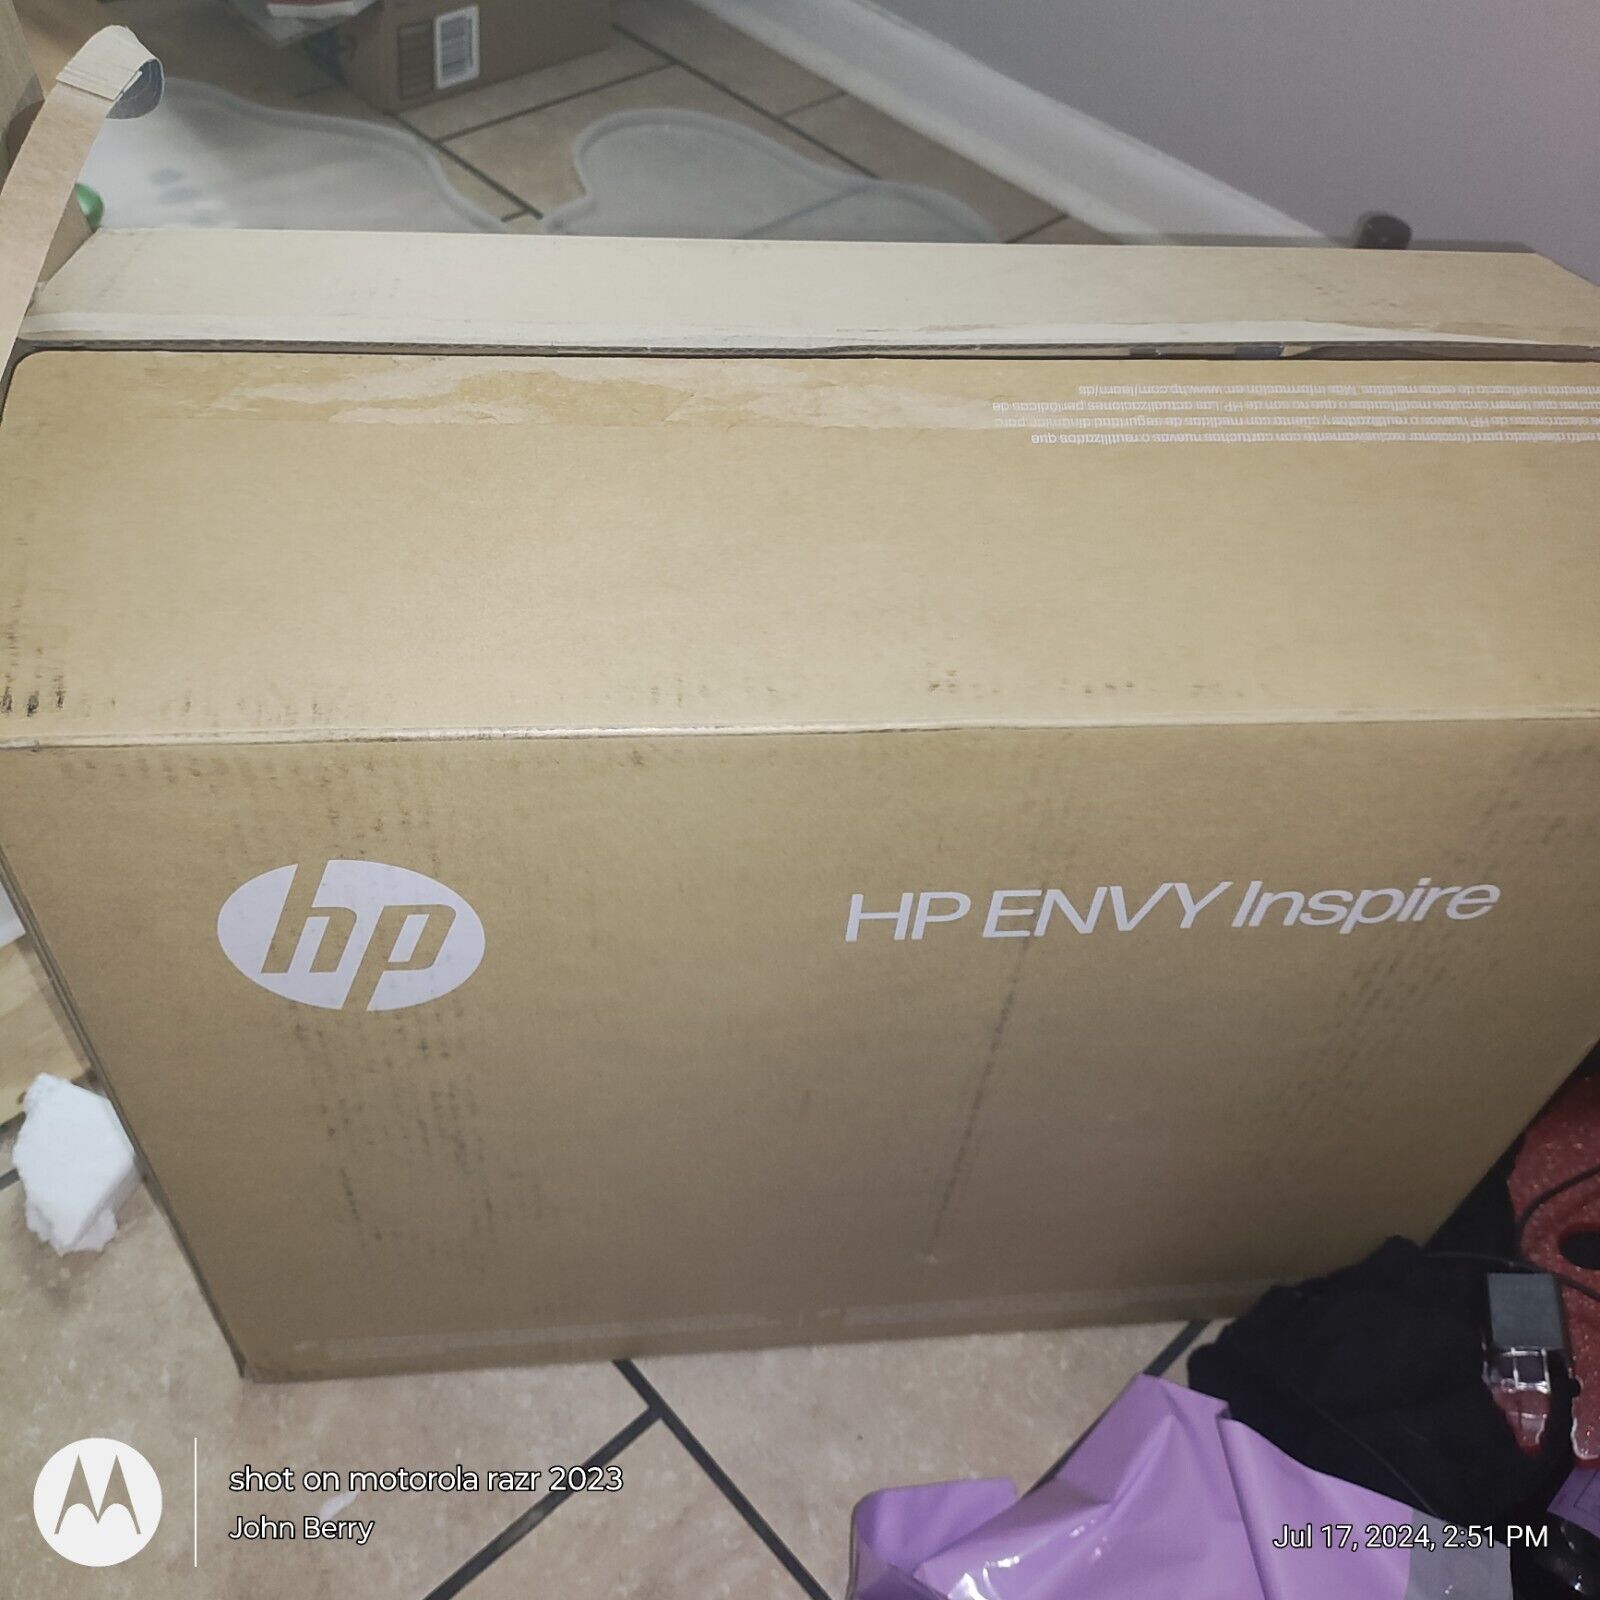 Hp Envy Inspire 7258e New Getting Out Of Printing Due To Health Issues Open/new 